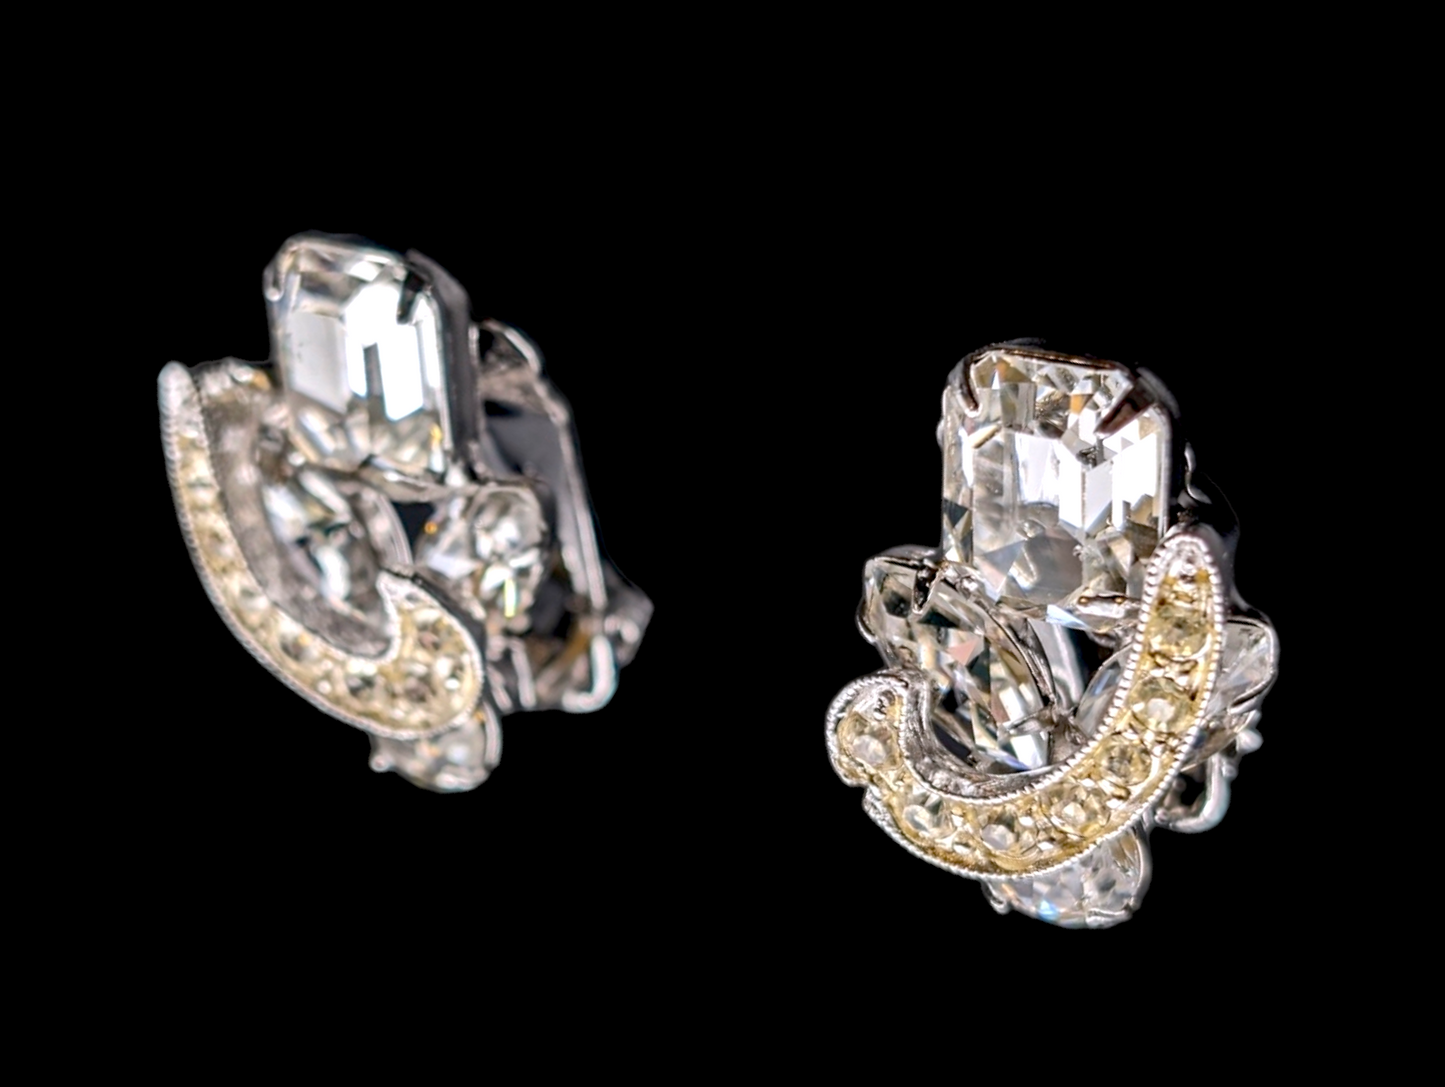 1950s Weiss Crystal Rhinestone Earrings with Gold Ribbon Accents